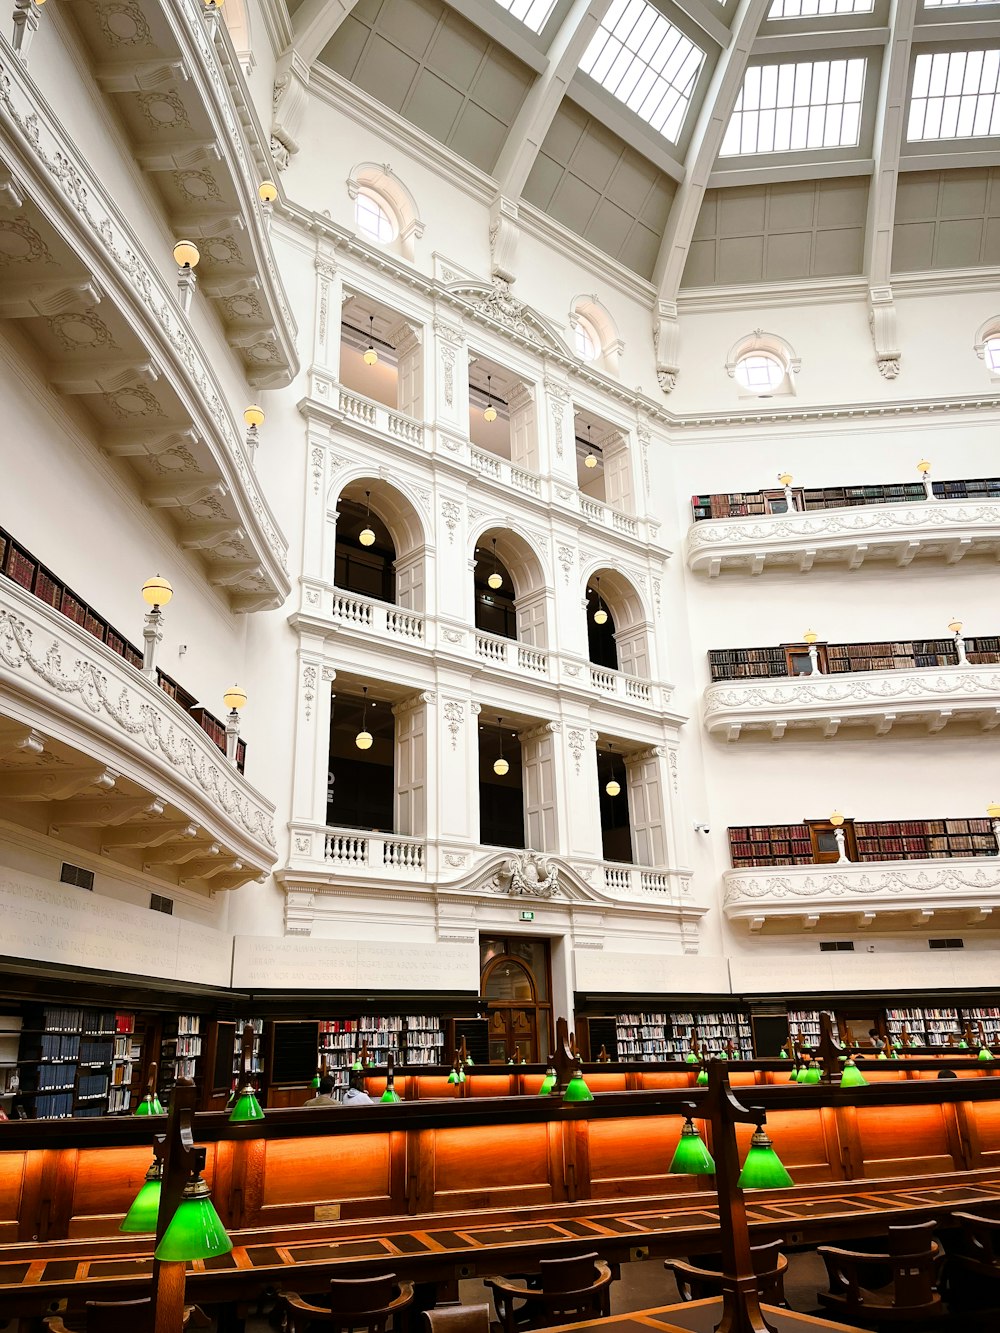 the interior of a large library with many bookshelves